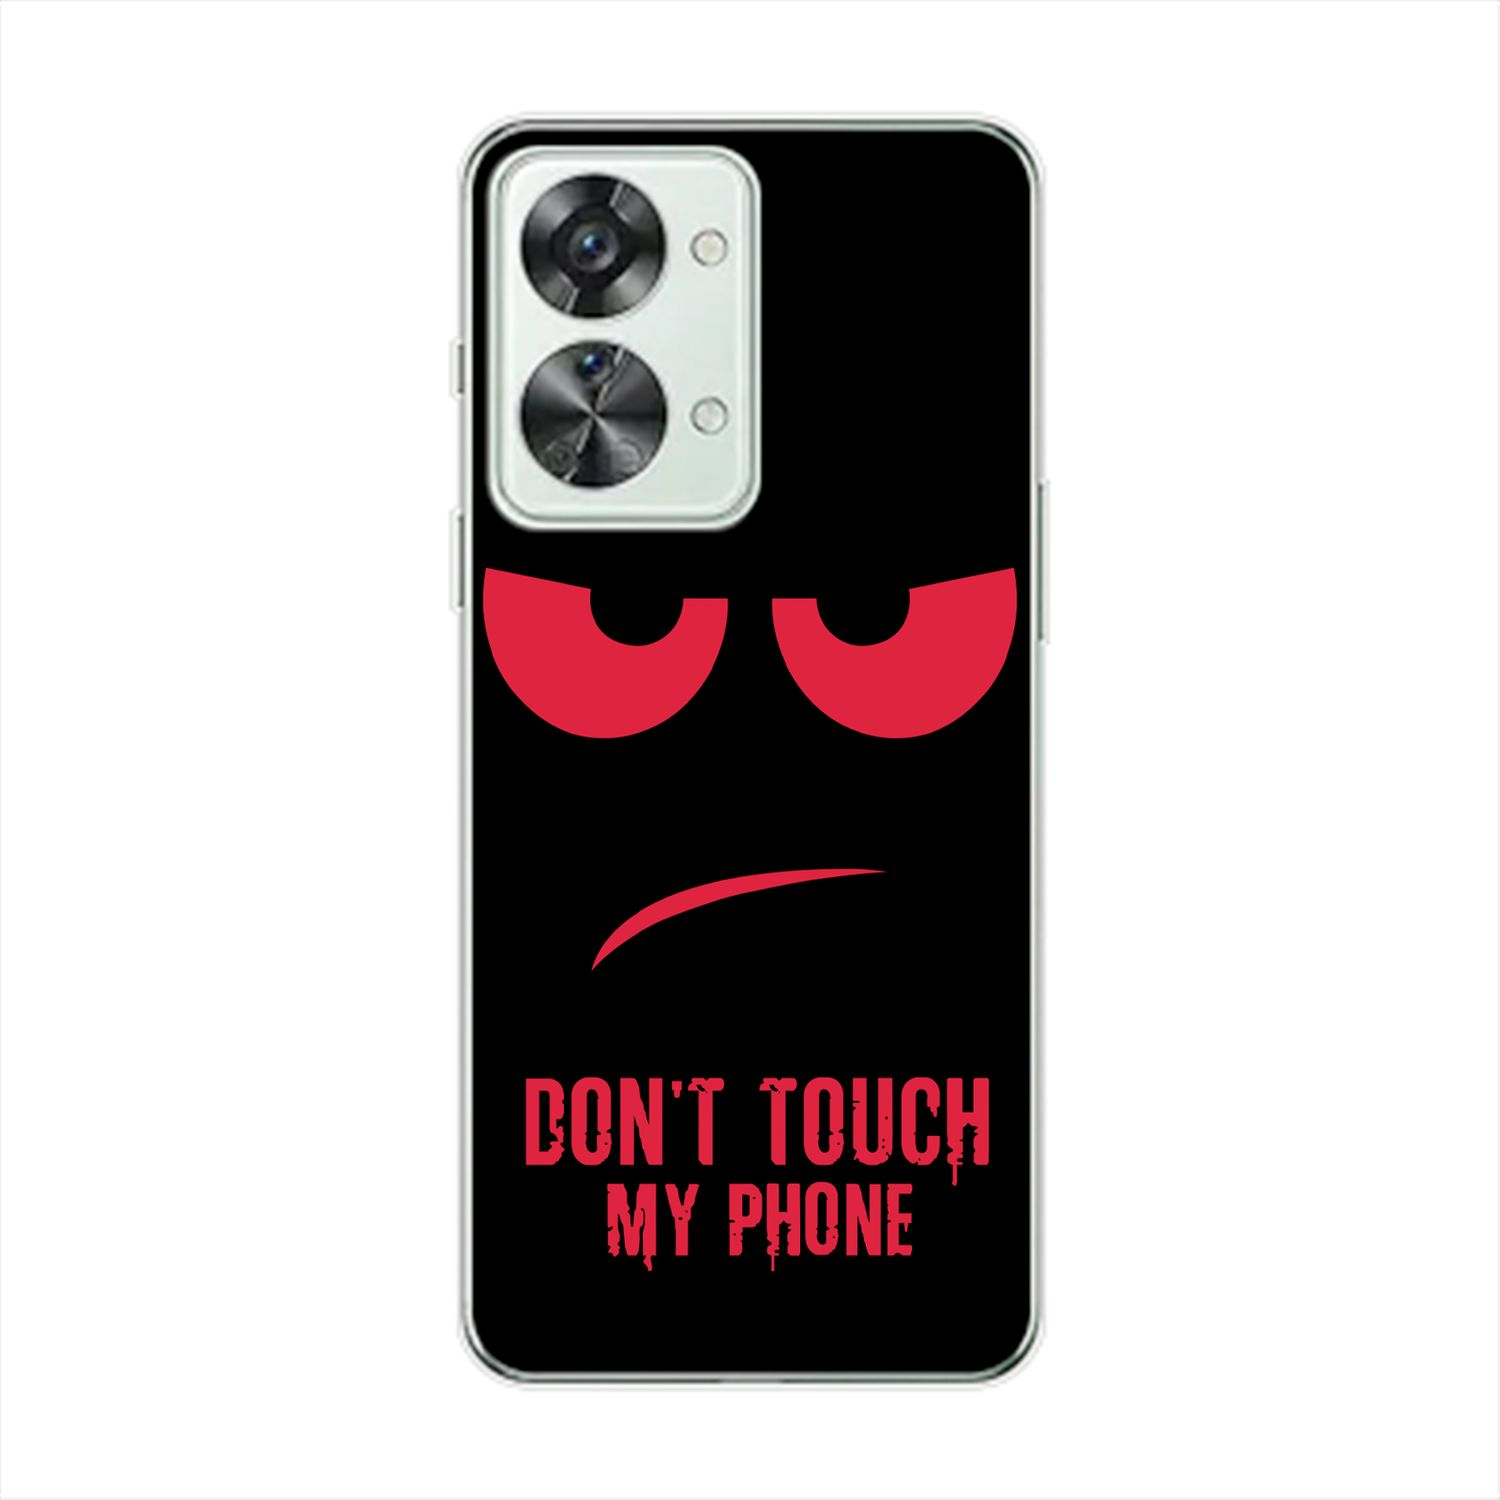 Case, KÖNIG 2T, Phone DESIGN My OnePlus, Backcover, Rot Dont Touch Nord